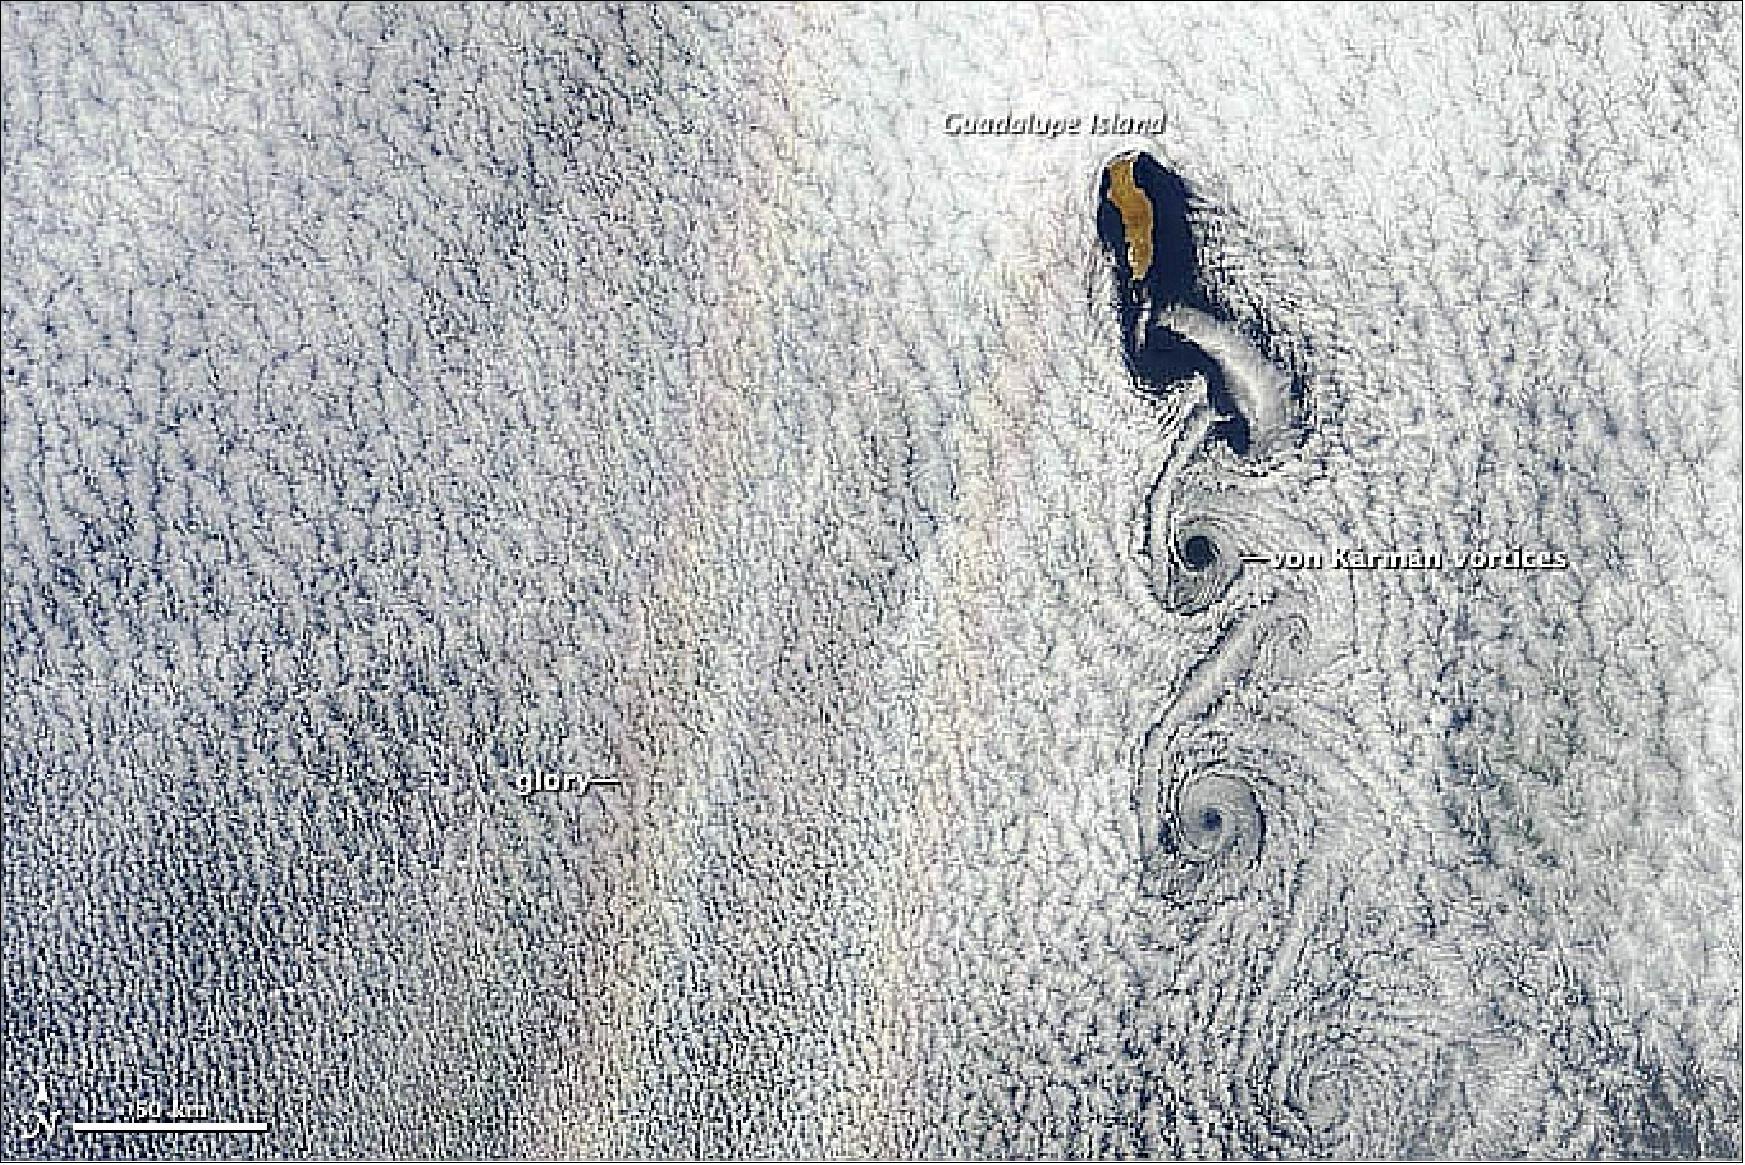 Figure 136: Image of stratocumulus clouds over the Pacific Ocean observed by MODIS on June 20, 2012 (image credit: NASA) 107)